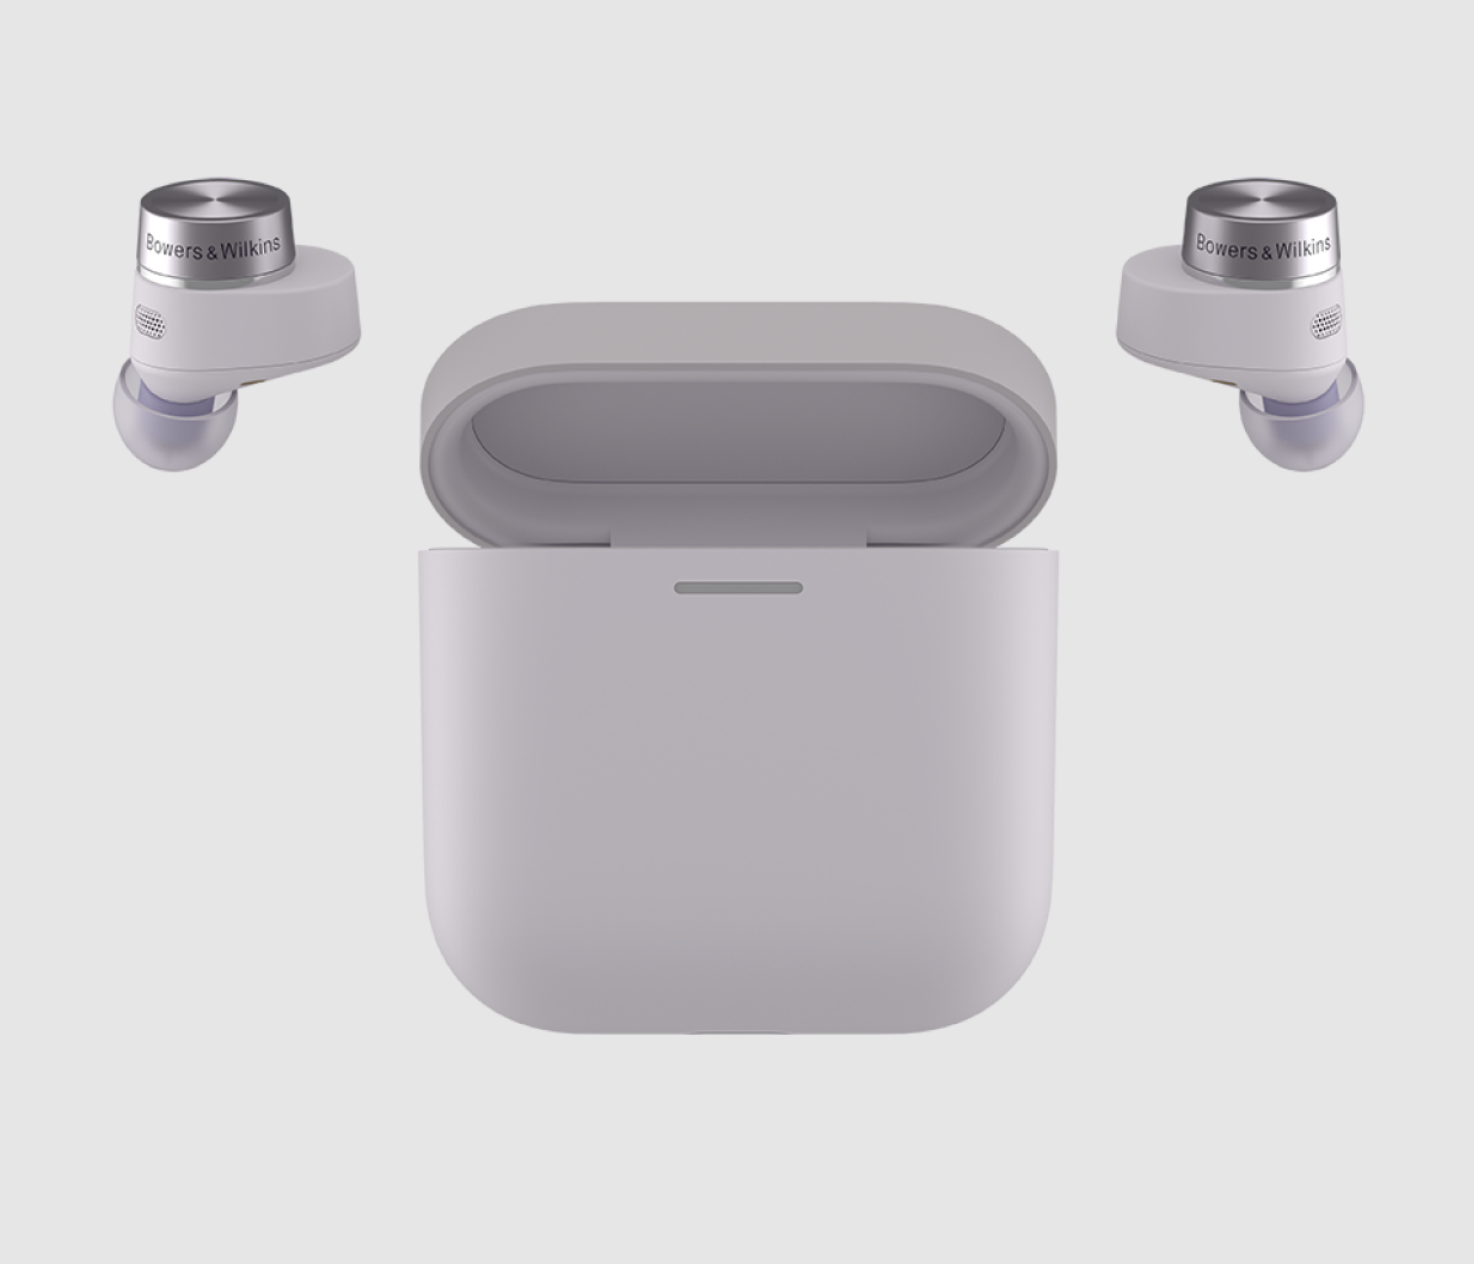 B&W Pi5 S2 Wireless Earbuds in Spring Lilac. Image with case